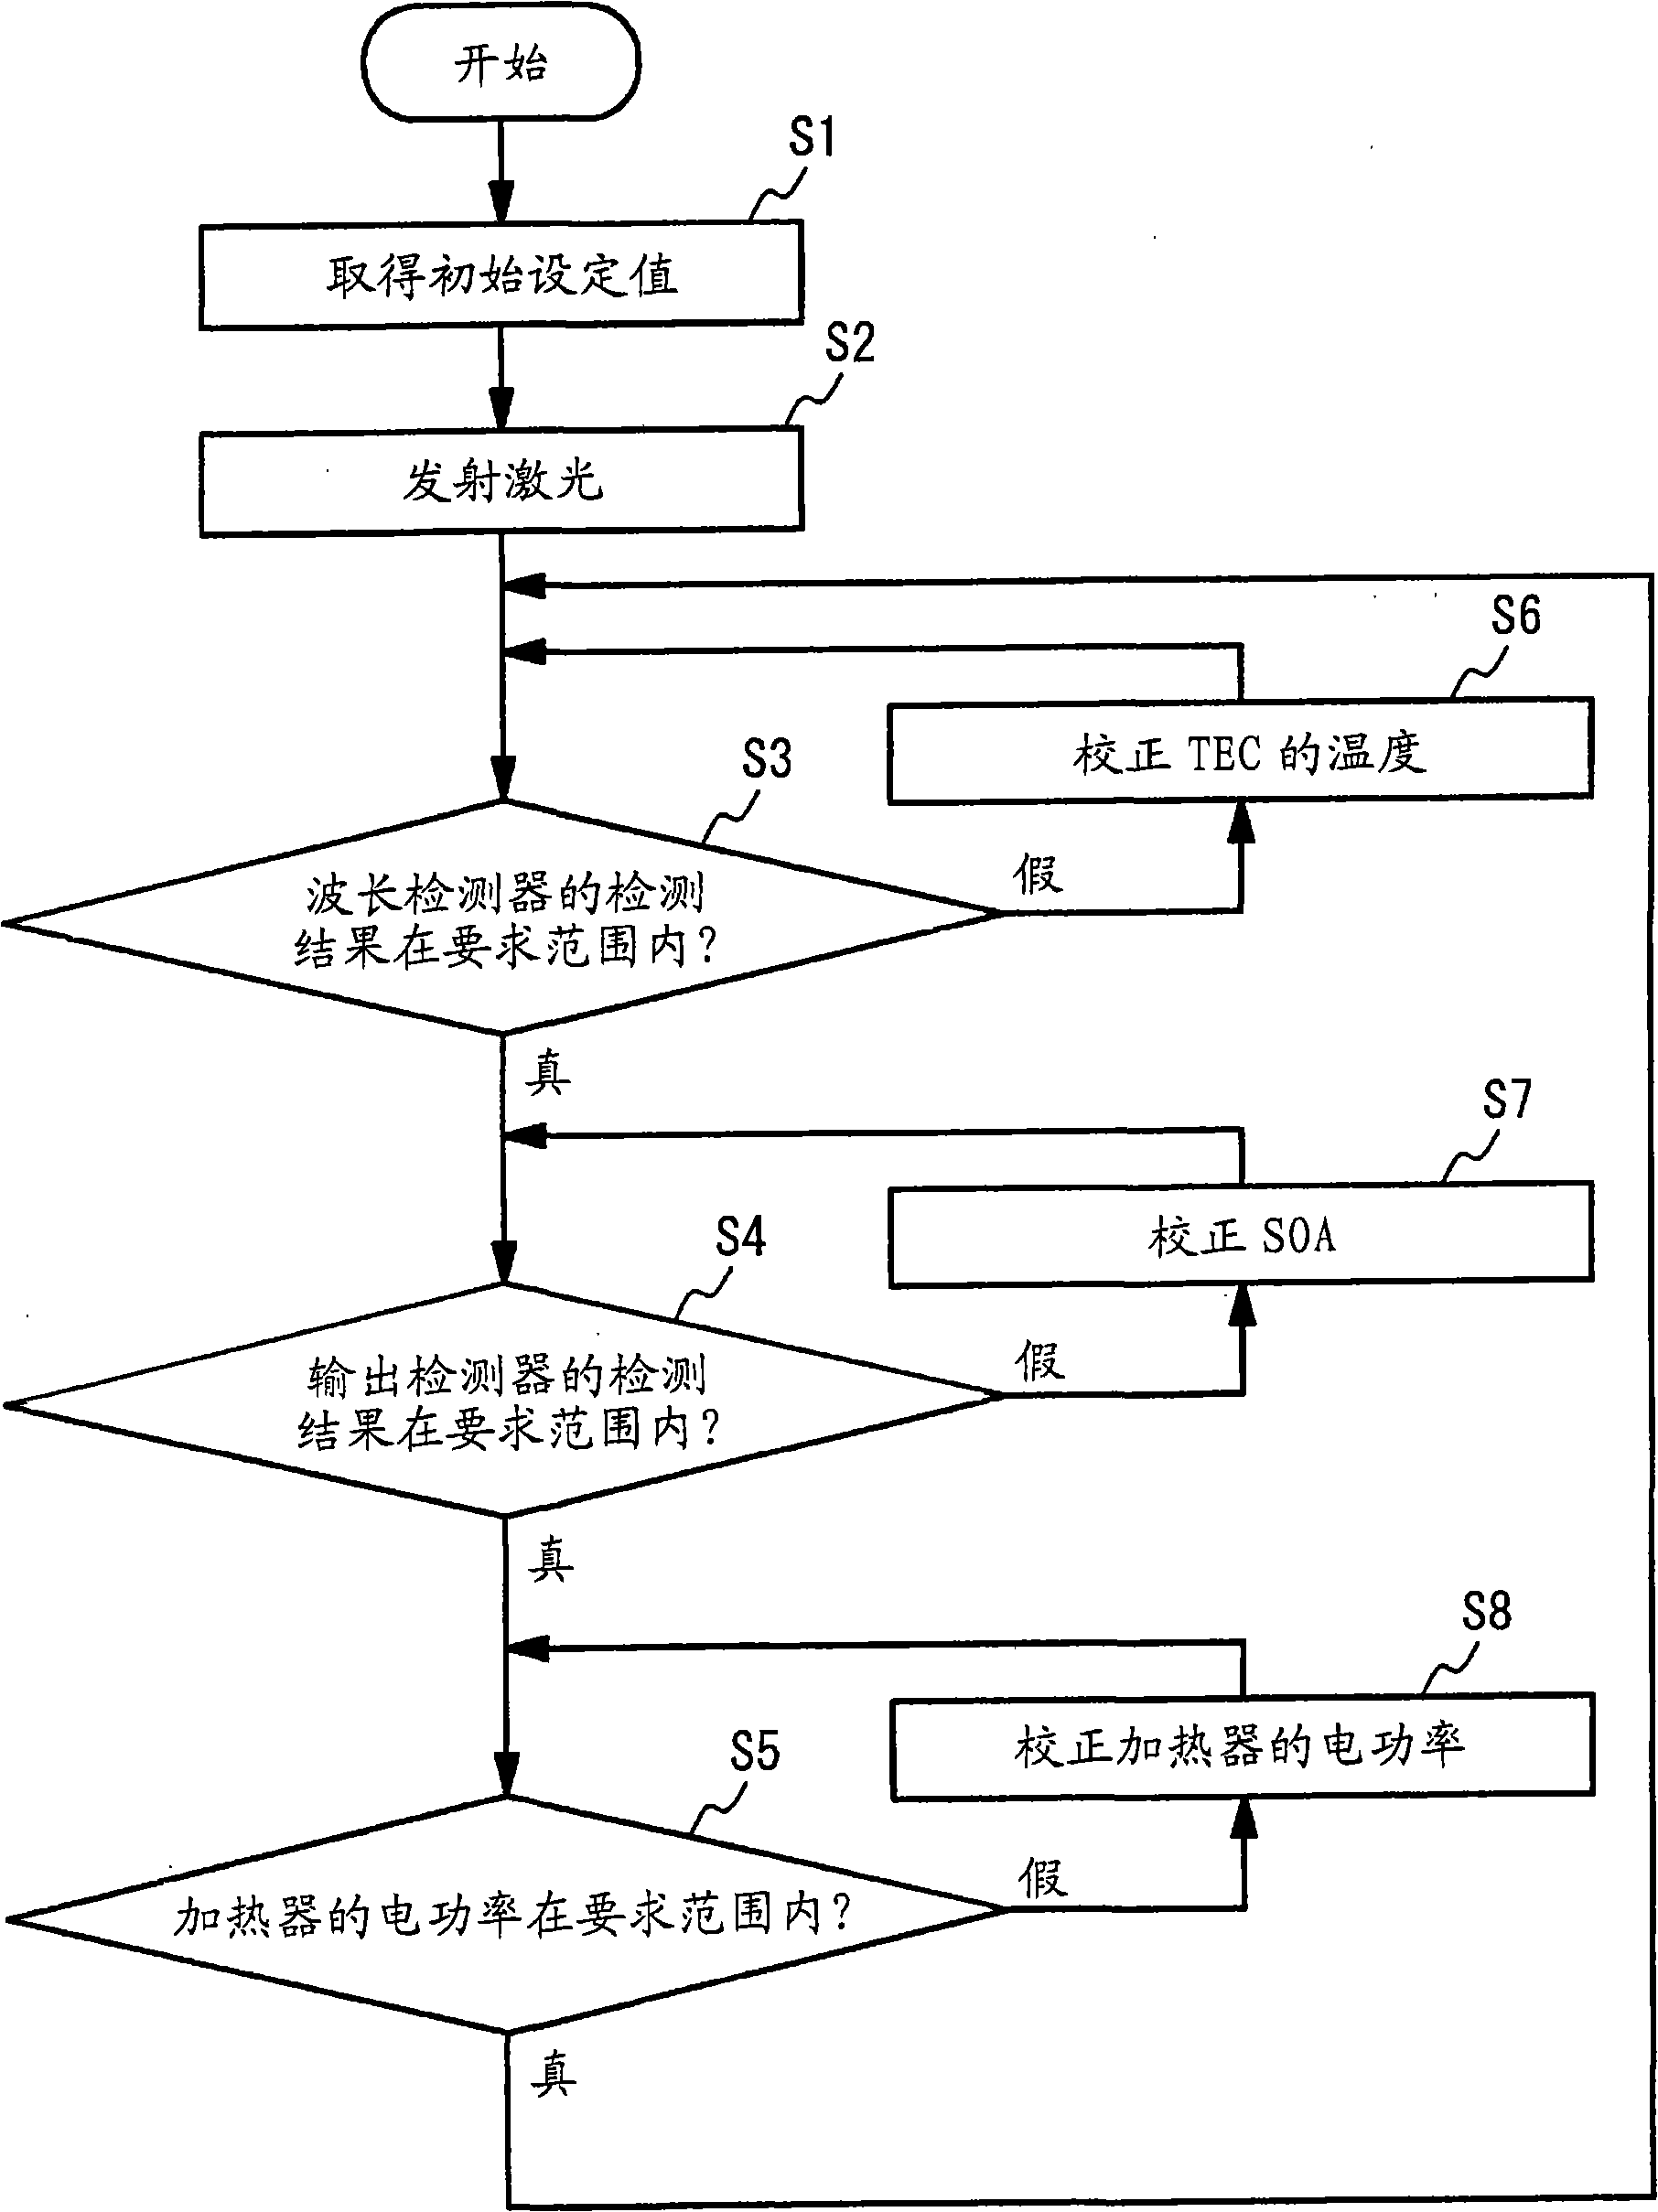 Optical device and method of controlling the same